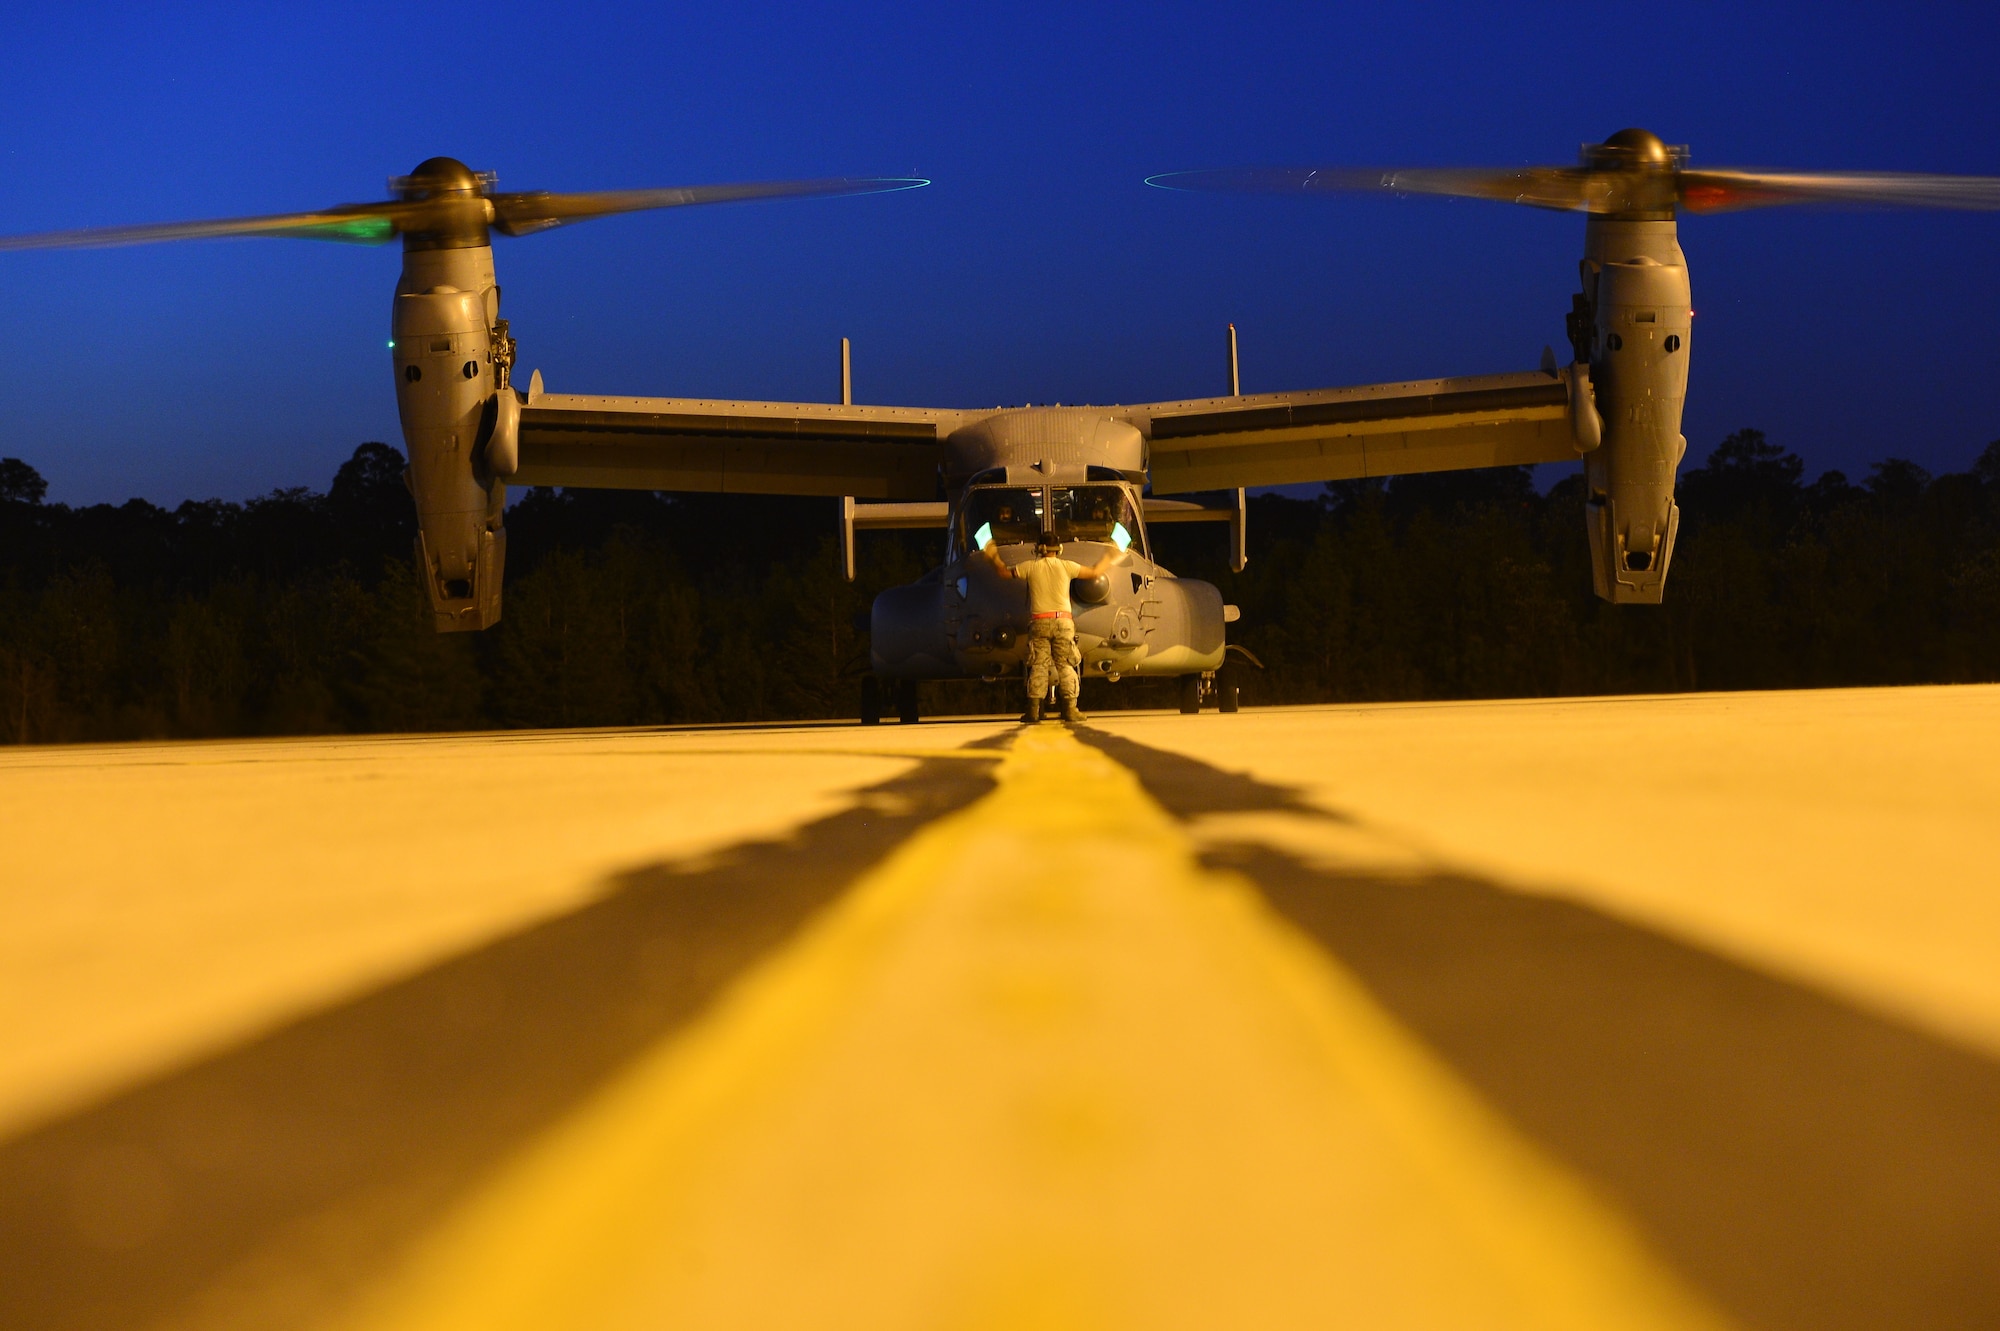 A CV-22 Osprey sits on the flight line May 3, 2014, during Emerald Warrior 14 at Hurlburt Field, Fla. Emerald Warrior is a U.S. Special Operations Command-sponsored two-week joint/combined tactical exercise designed to provide realistic military training in an urban setting. (U.S. Air Force photo/Airman 1st Class Jasmonet Jackson)